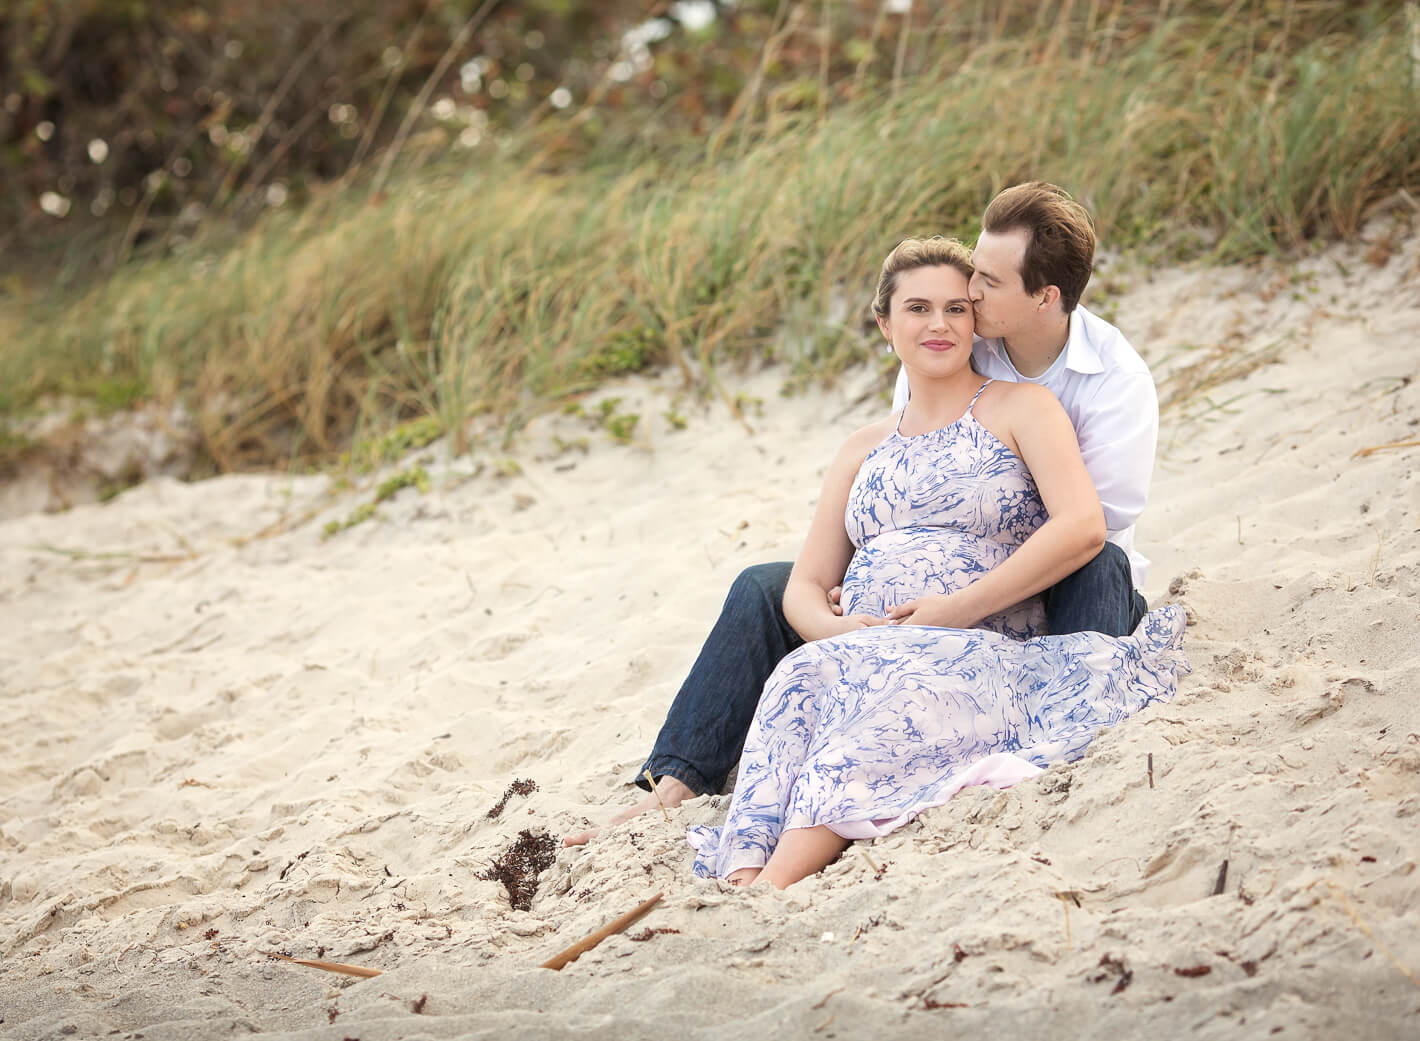 Dad kissing mom-to-be on beach during maternity session